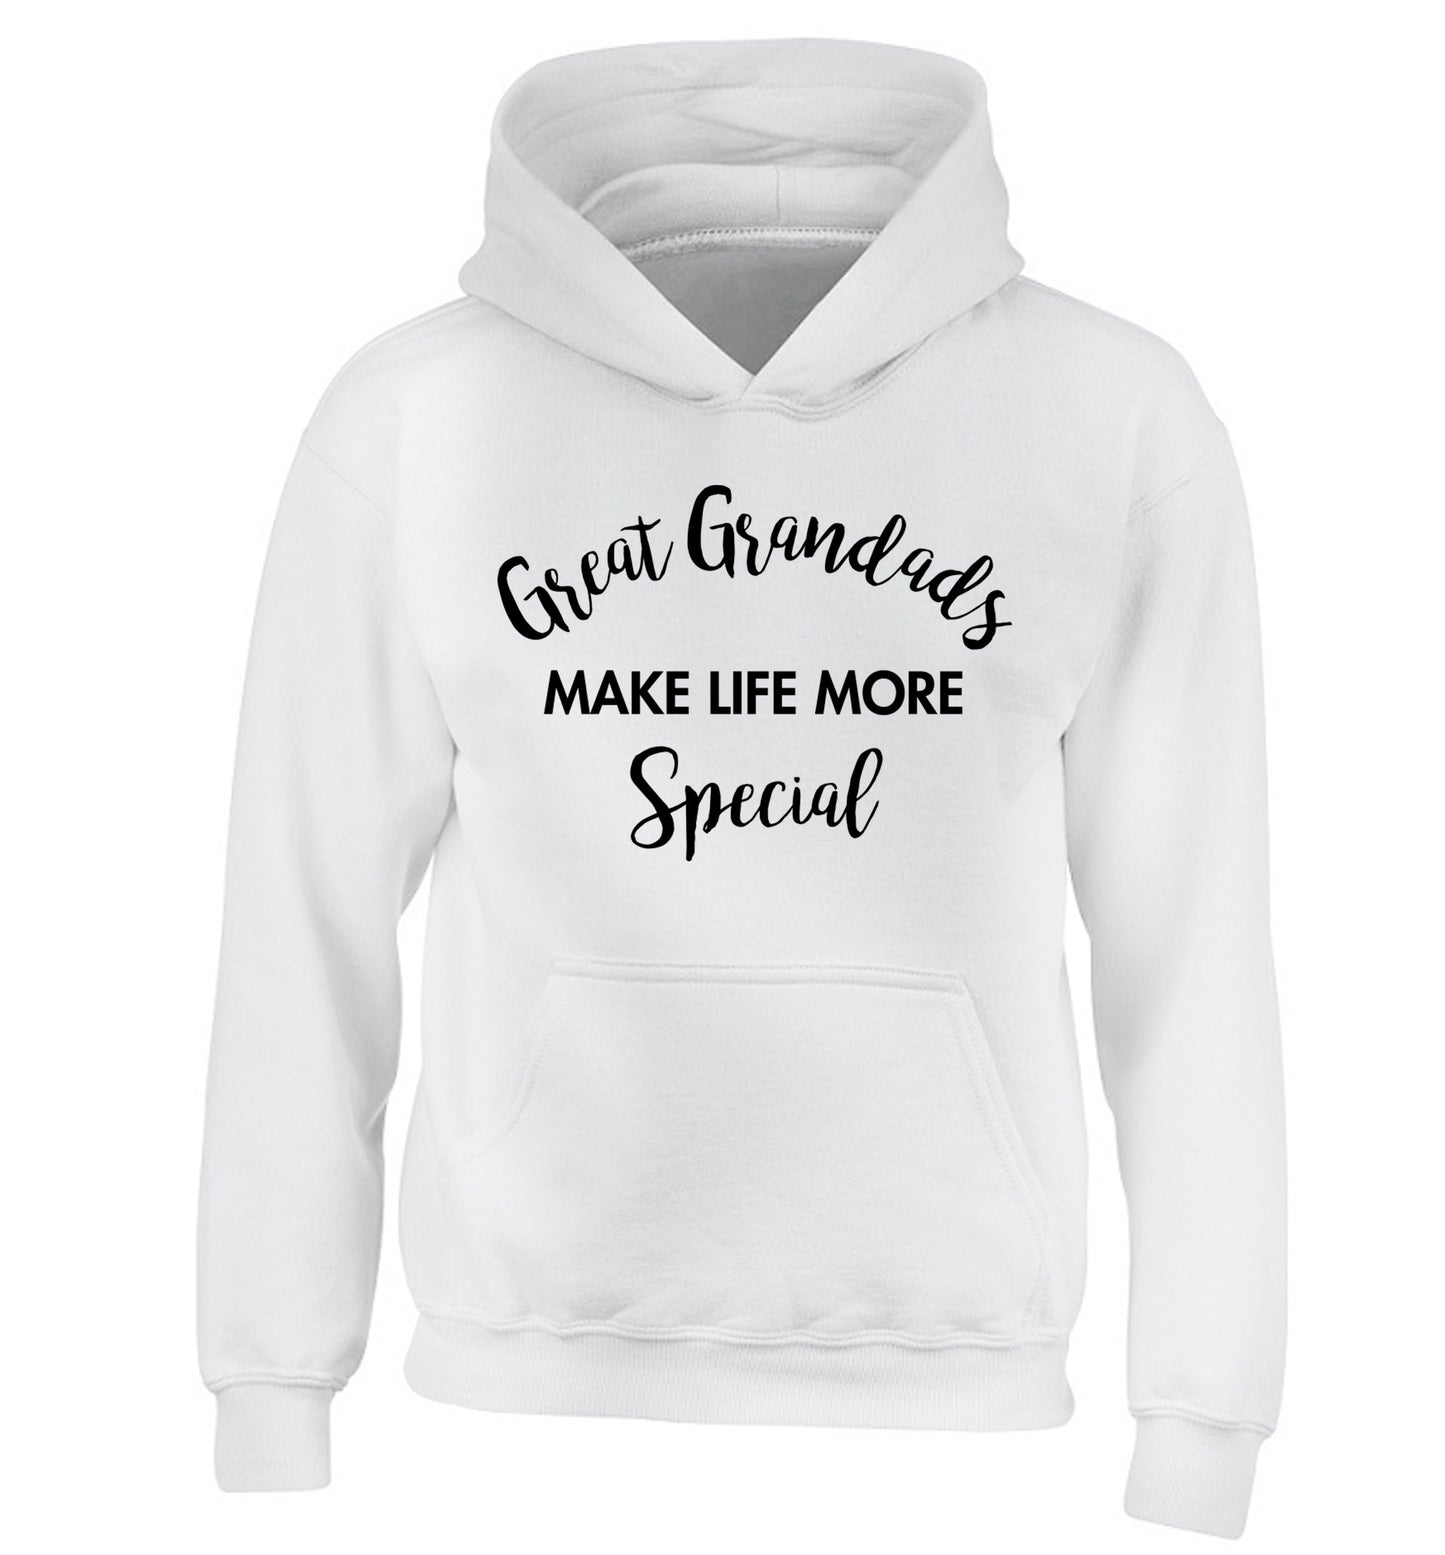 Great Grandads make life more special children's white hoodie 12-14 Years